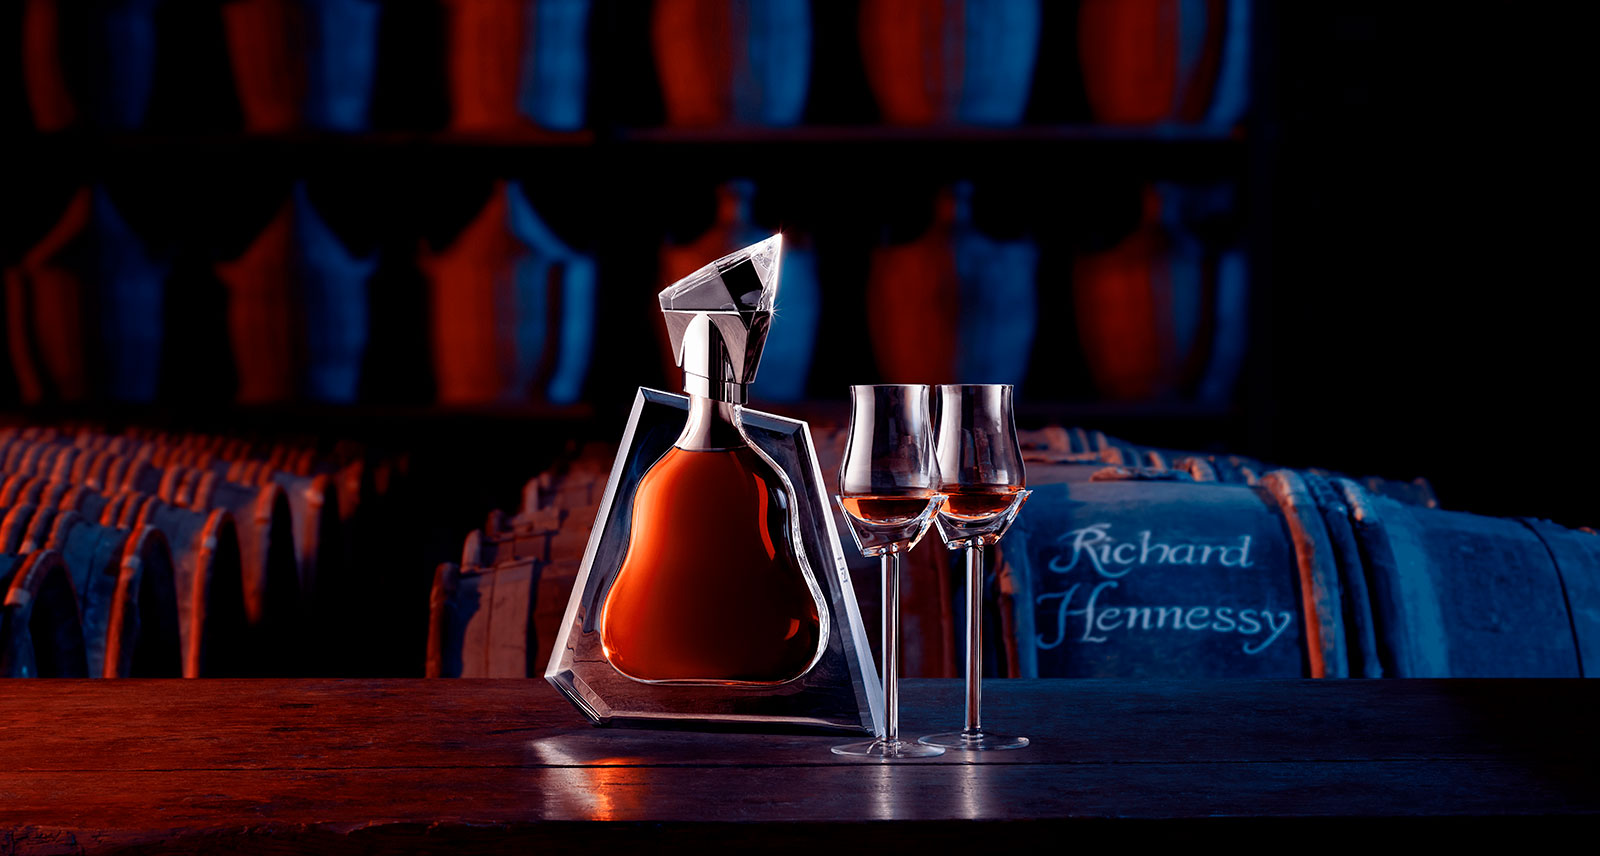 Daniel Libeskind’s New Hennessy Bottle Is a Work of Art